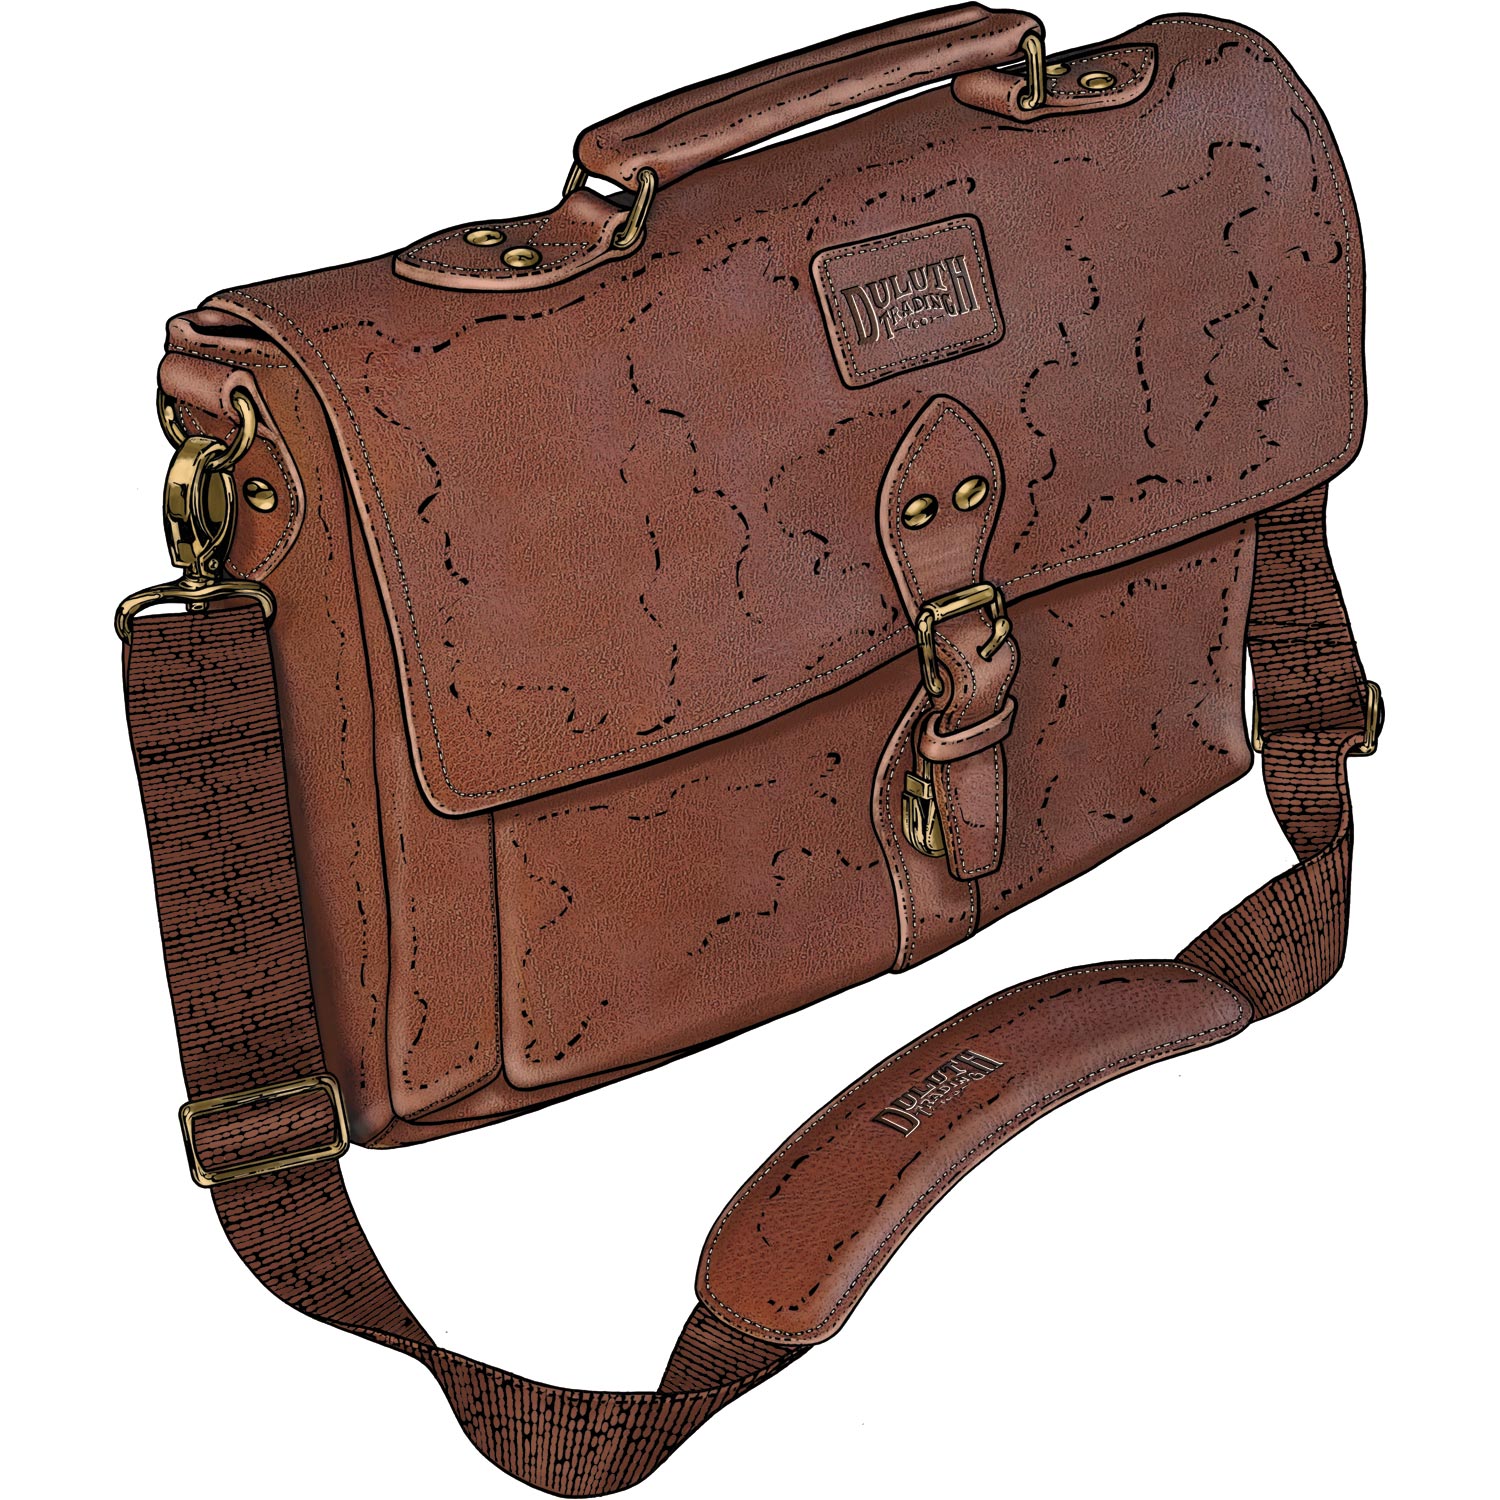 All-Business Briefcase - Duluth Trading